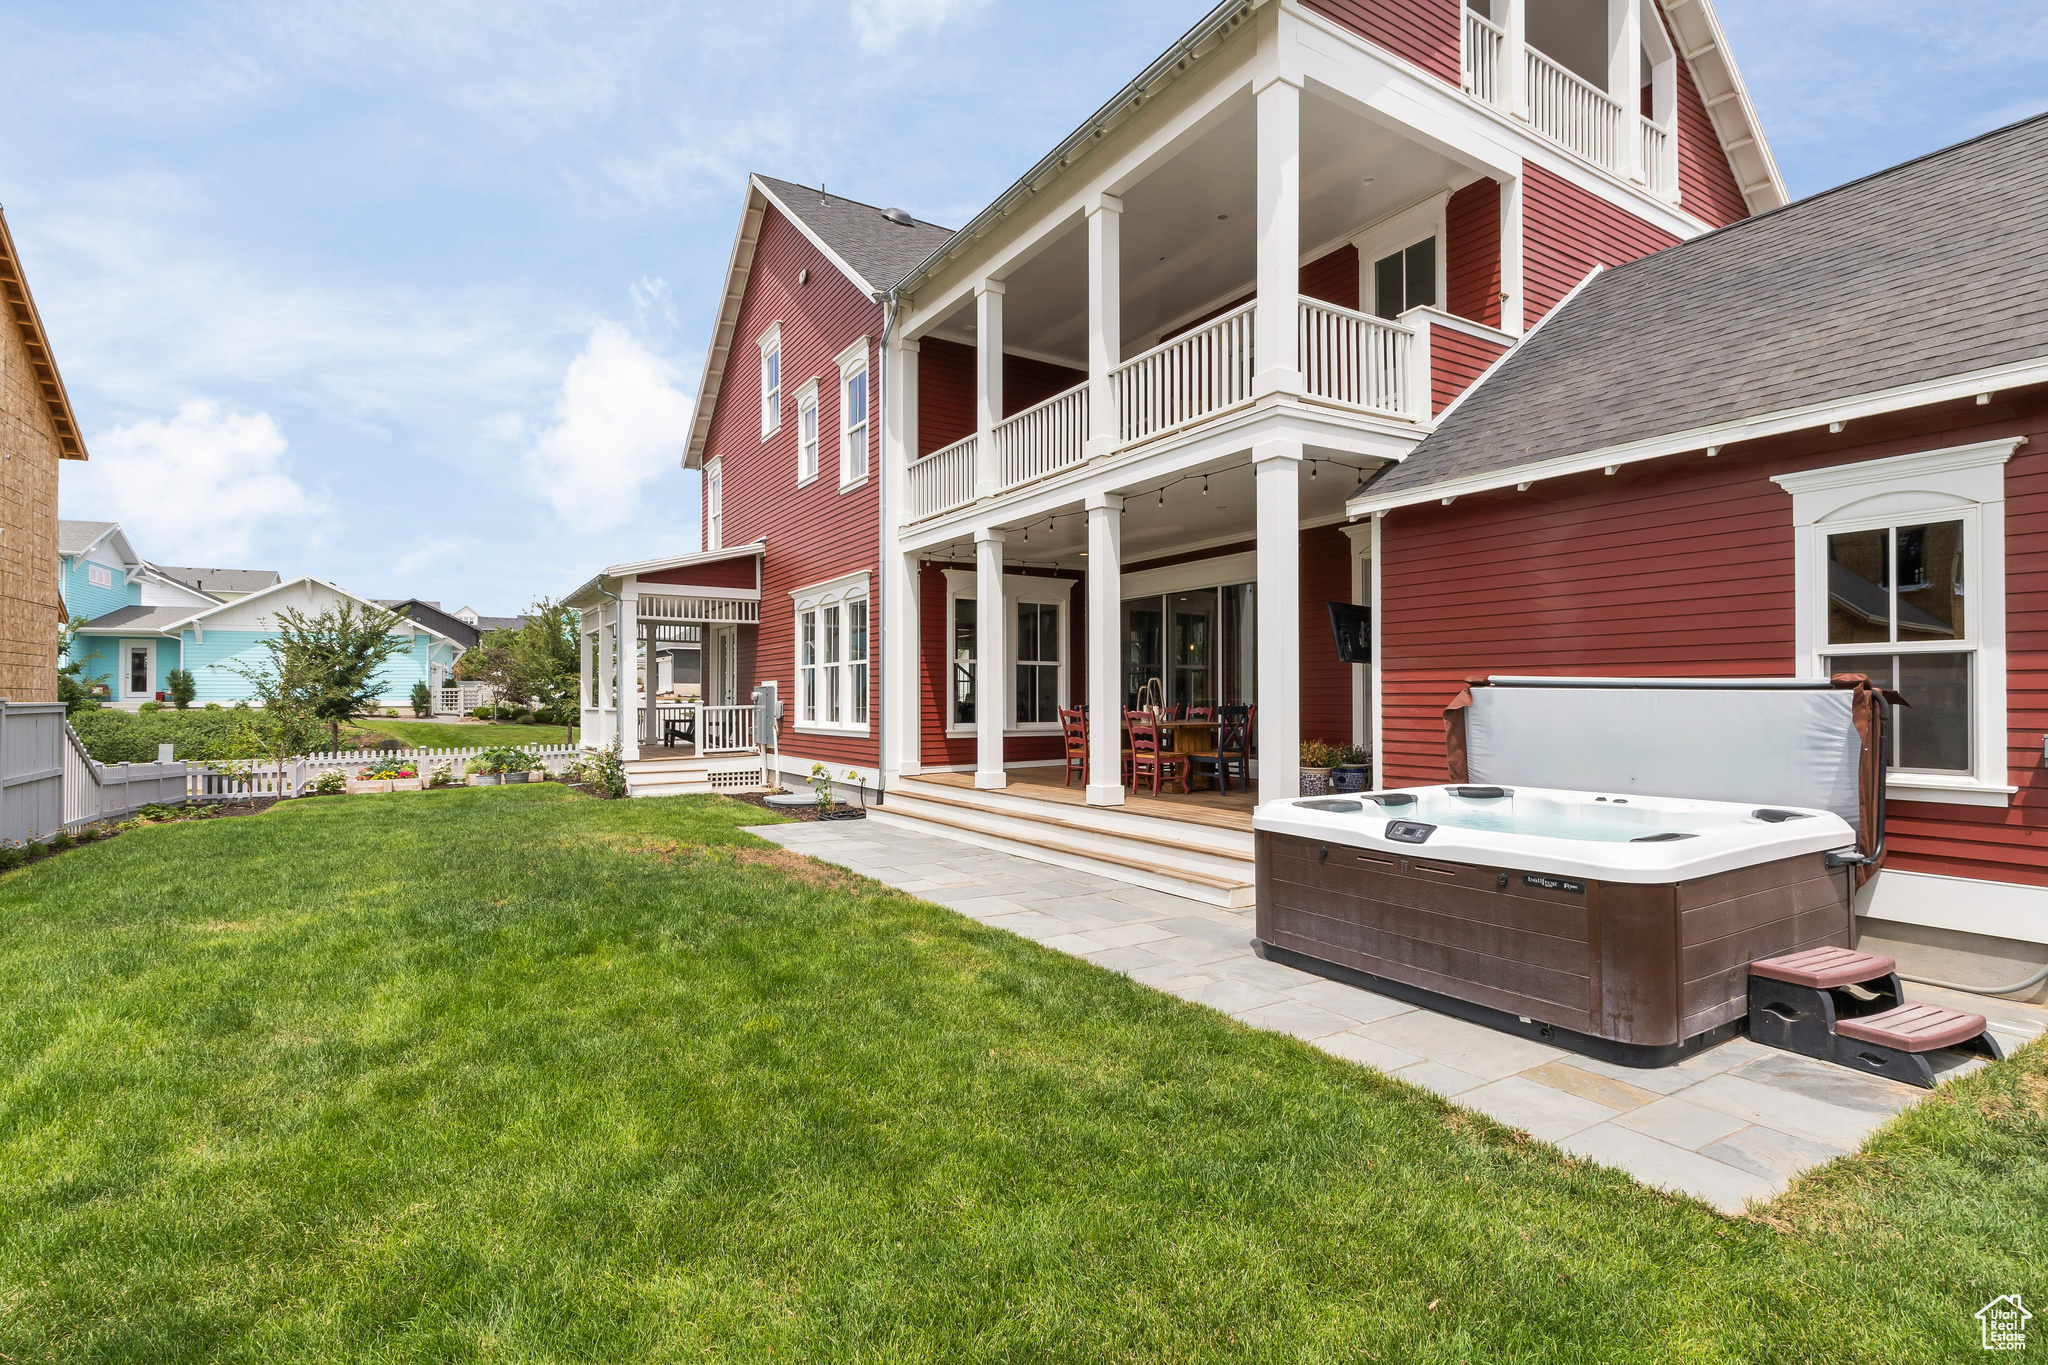 Rear view of house with a lawn, a hot tub, and a balcony